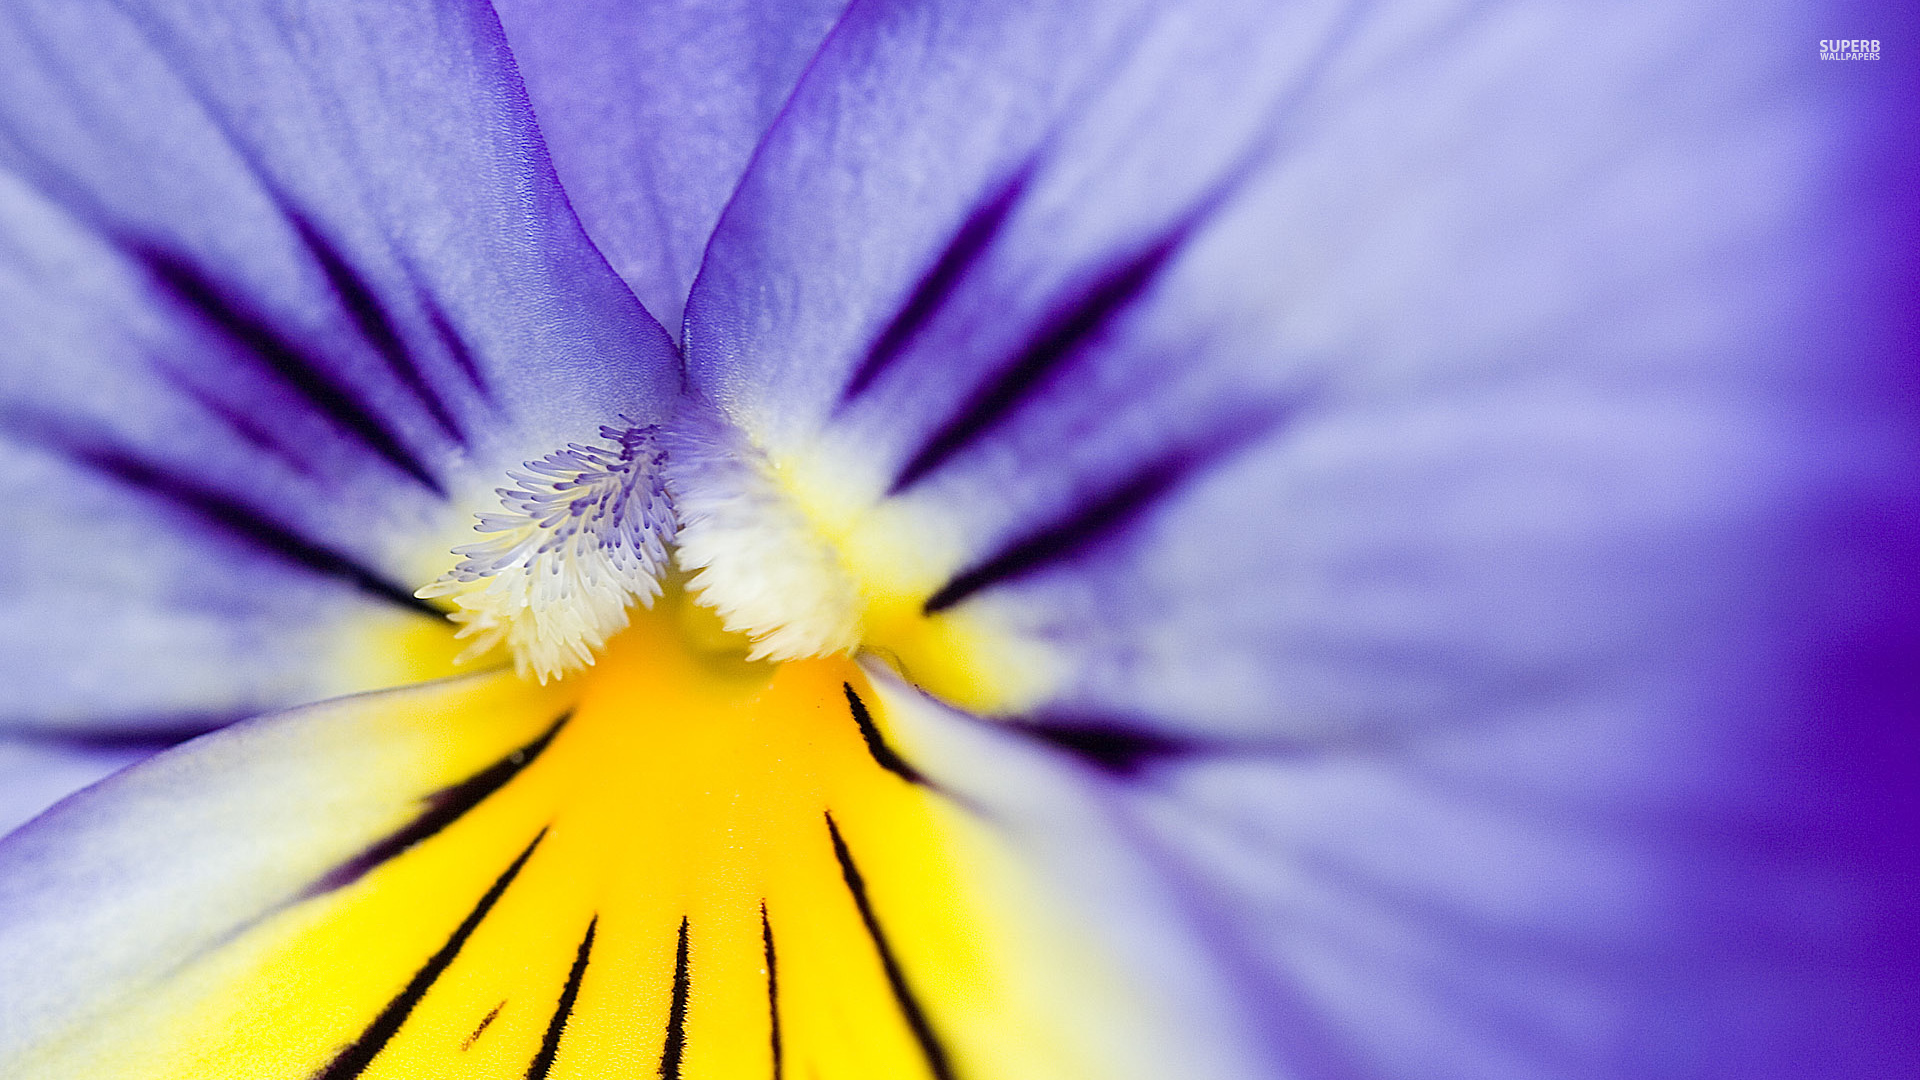 Flowers Yellow And Purple - HD Wallpaper 